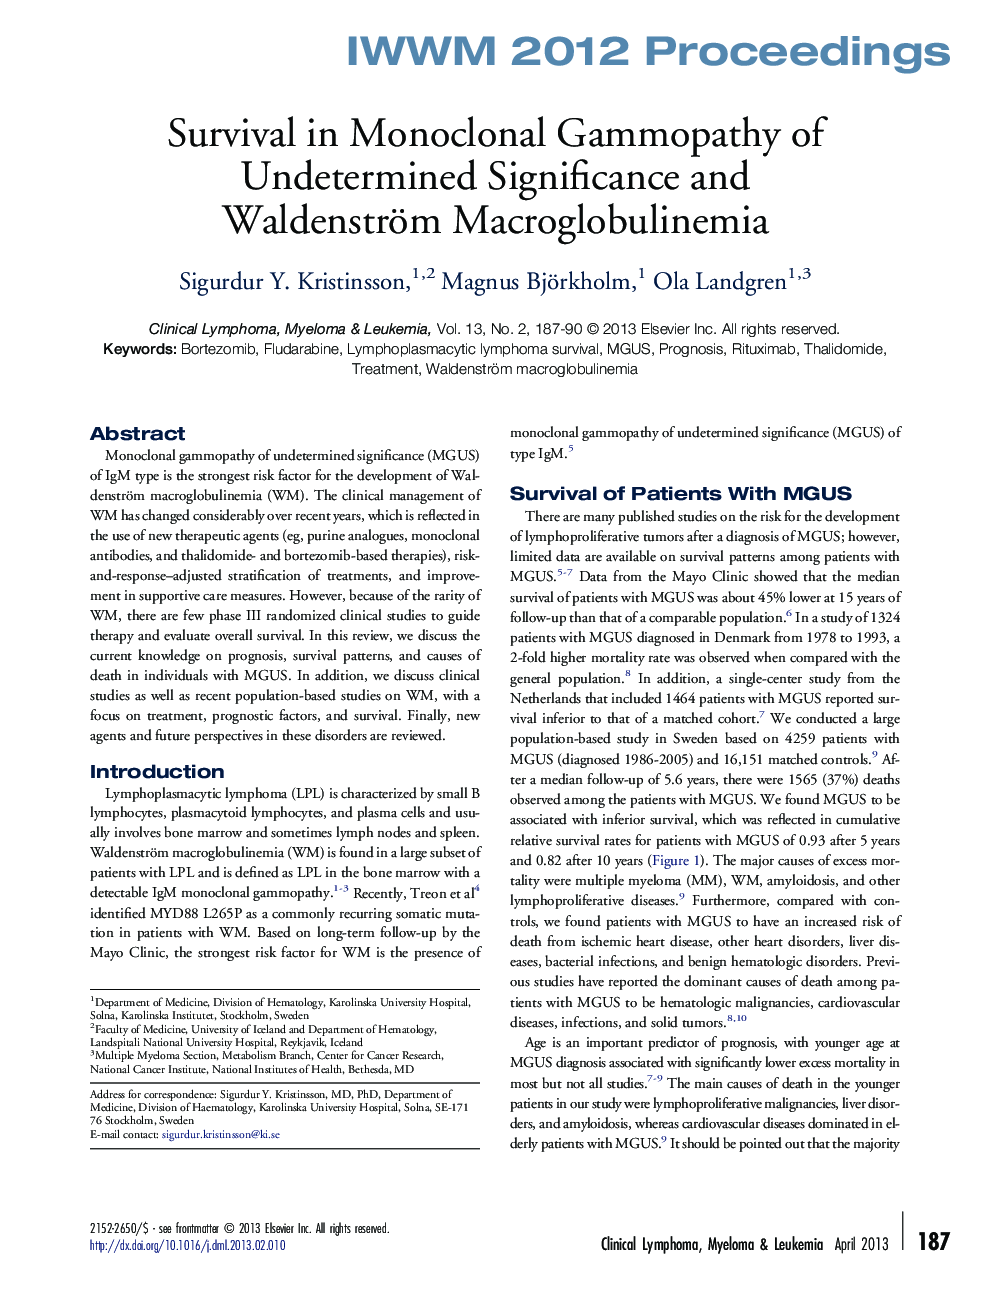 Survival in Monoclonal Gammopathy of Undetermined Significance and Waldenström Macroglobulinemia